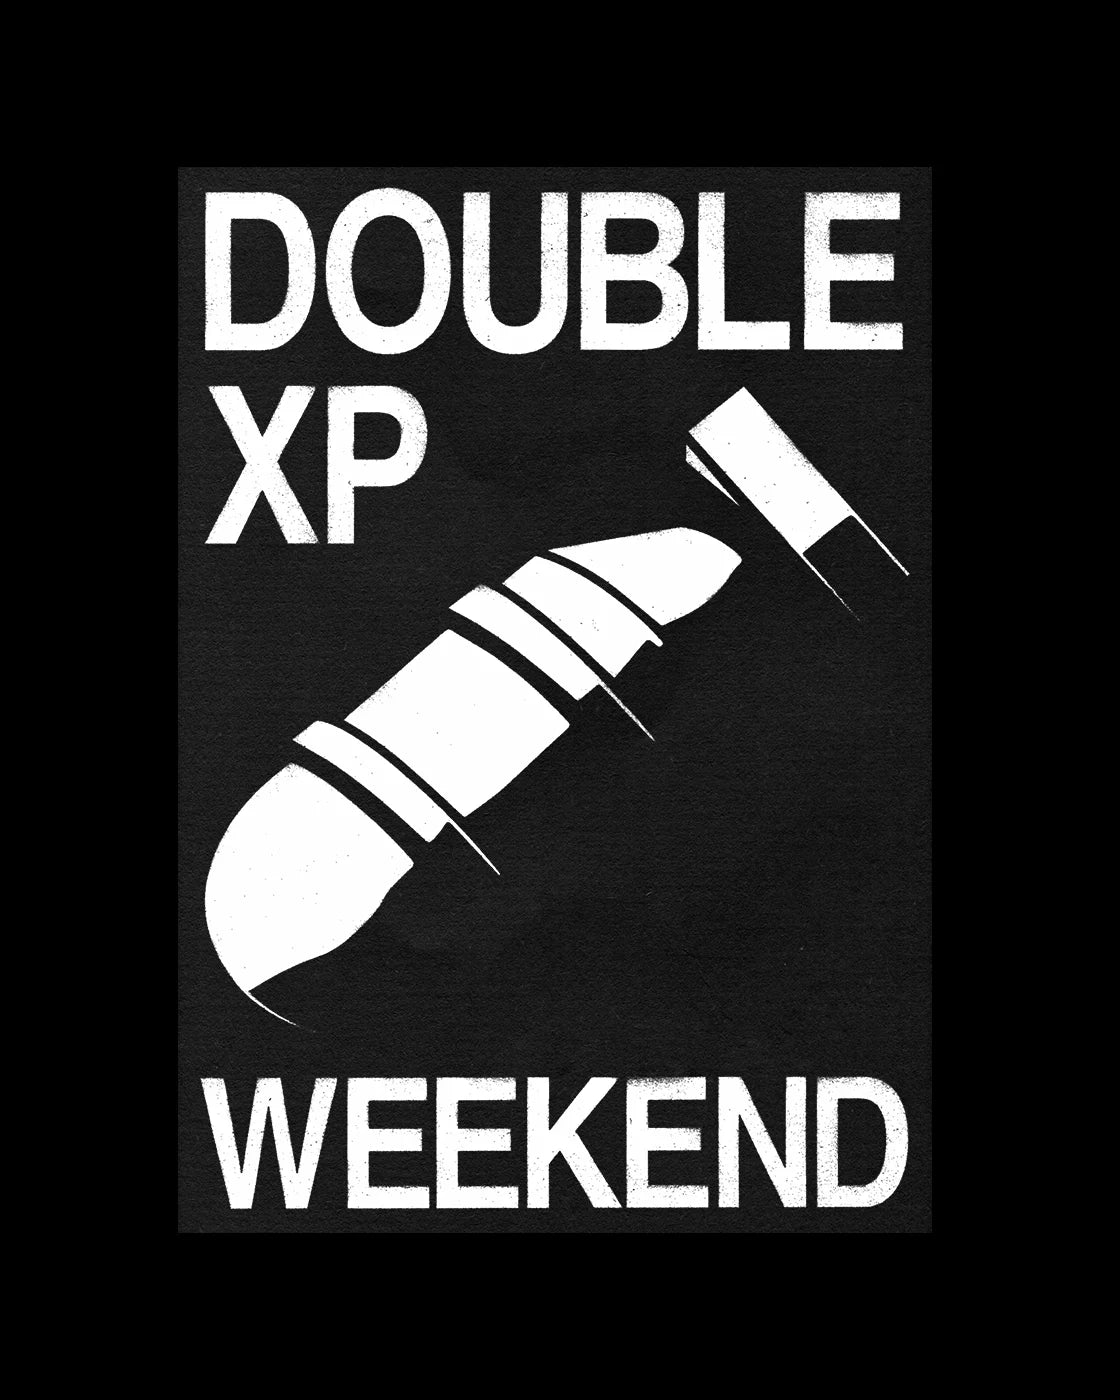 DOUBLE XP WEEKEND POSTER